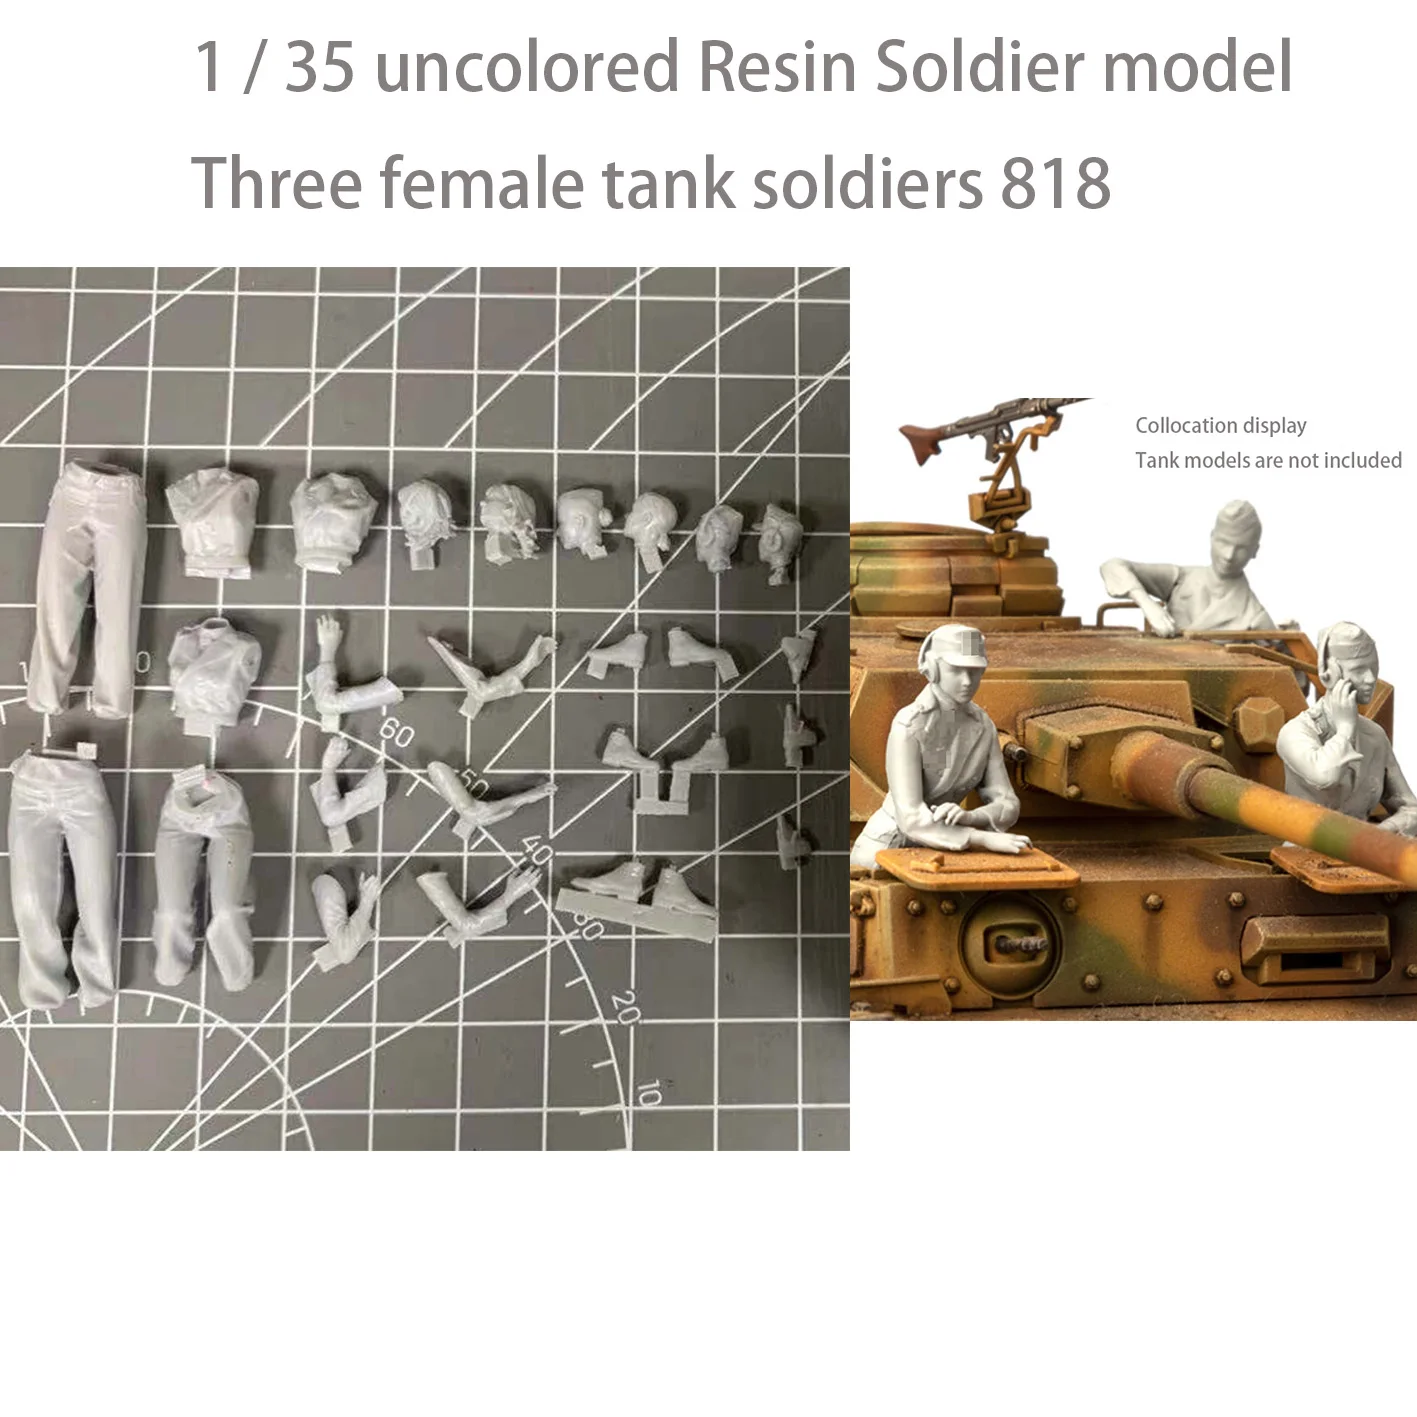 

1 / 35 uncolored Resin Soldier model Three female tank soldiers 818